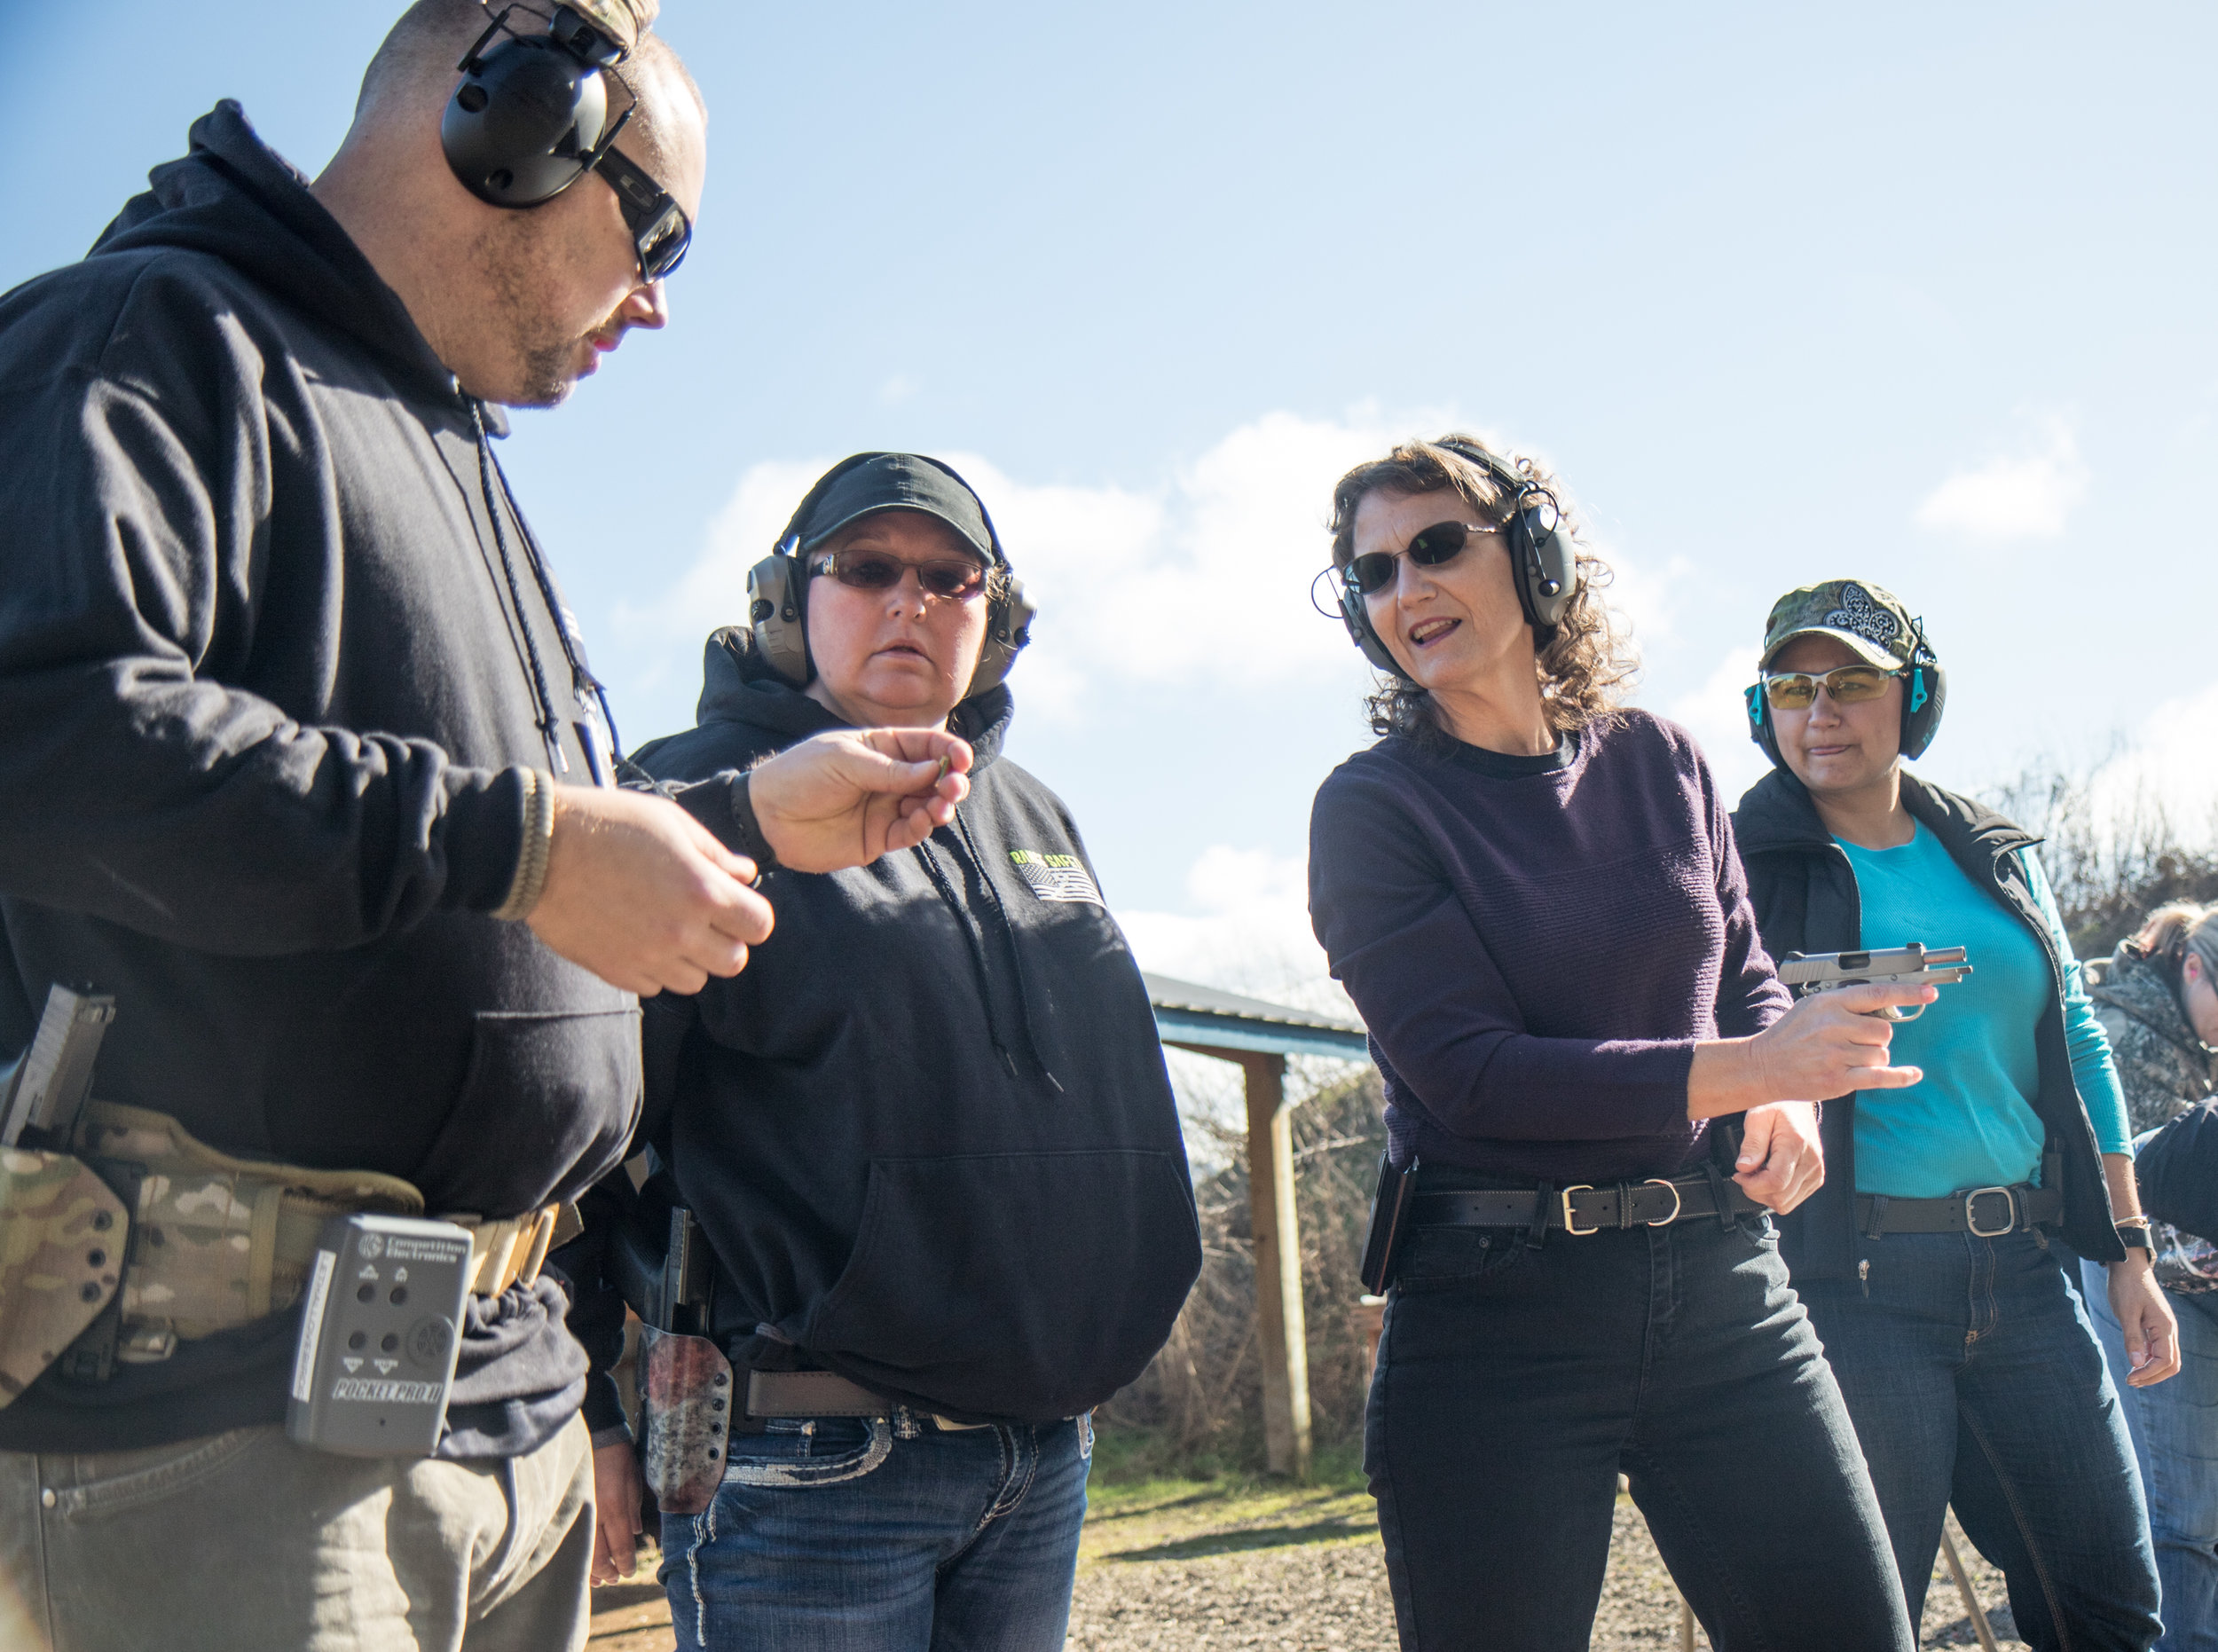  Karen Wussting speaks with Derek LeBlanc about techniques for dealing with a misfiring gun during a women's self defense course at the Albany Pistol &amp; Rifle Club in Albany, Ore., on Feb. 11, 2017. "My goal is to get as many of these women as pos